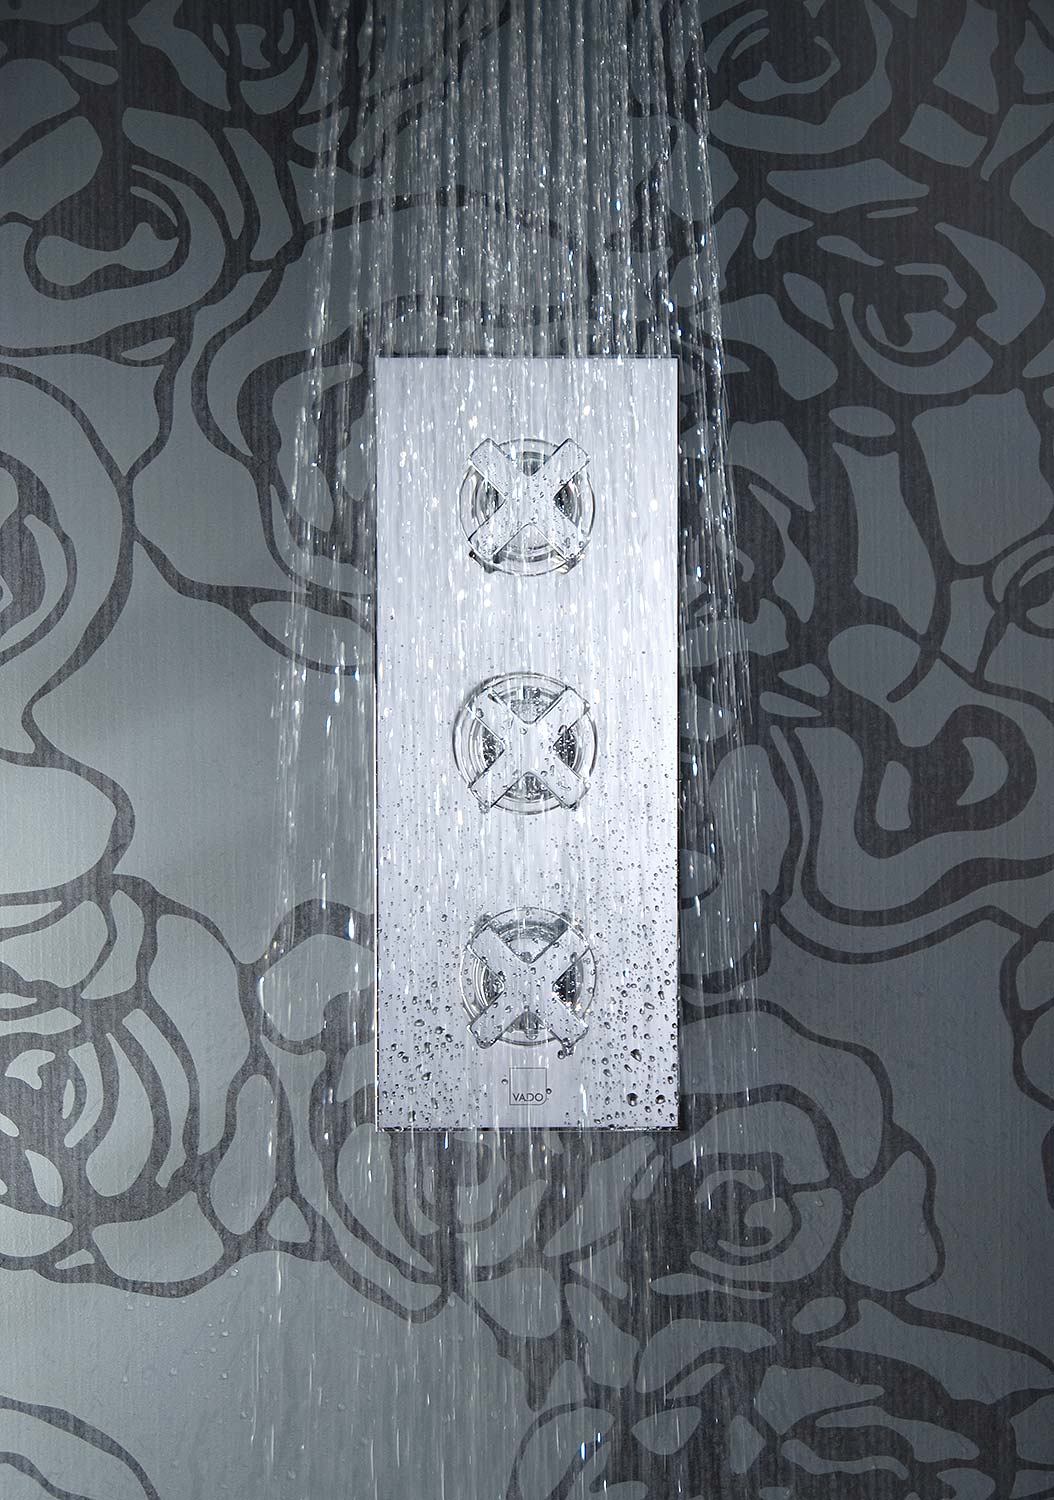 Square on photograph of a three handle shower valve with water falling in front of it on a graphic grey tiled wall.